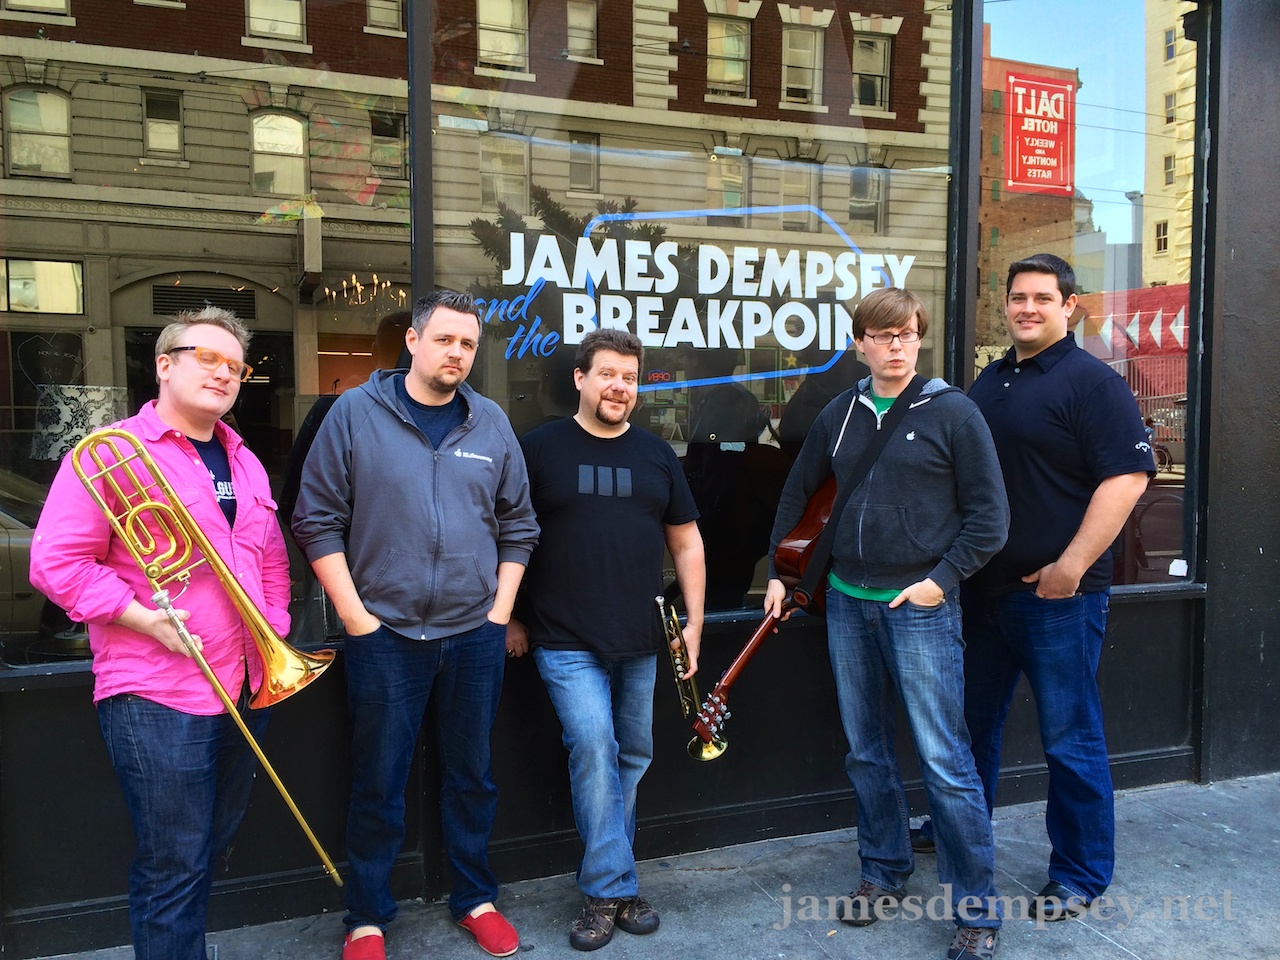 Sam Davies, Ben Scheirman, Daniel Pasco, Jonathan Penn and Nathan Eror stand outside the venue in front of a James Dempsey and the Breakpoints banner